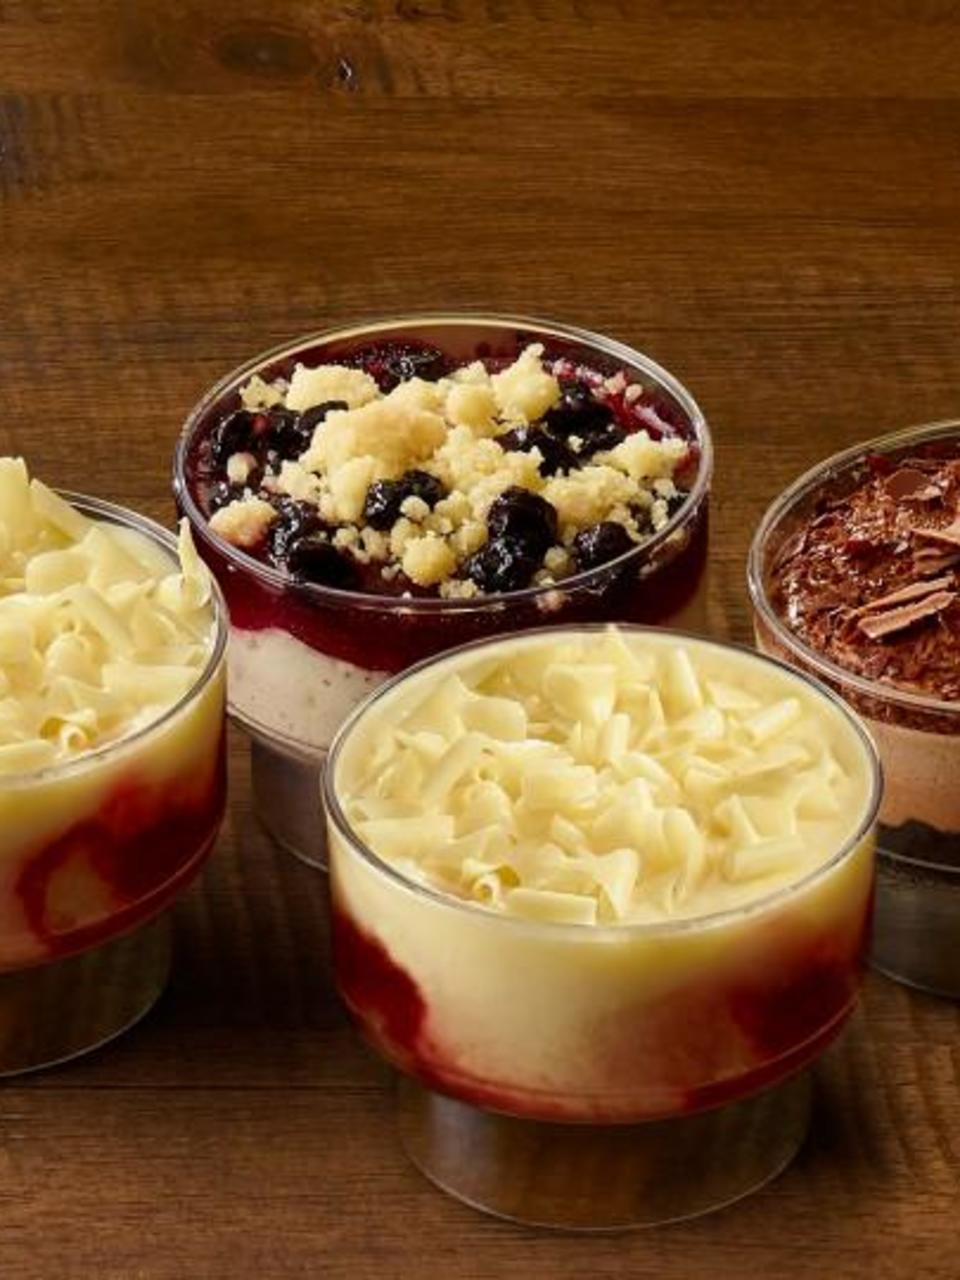 Olive Garden Gifting Leap Day Babies With 4 Free Desserts To Make